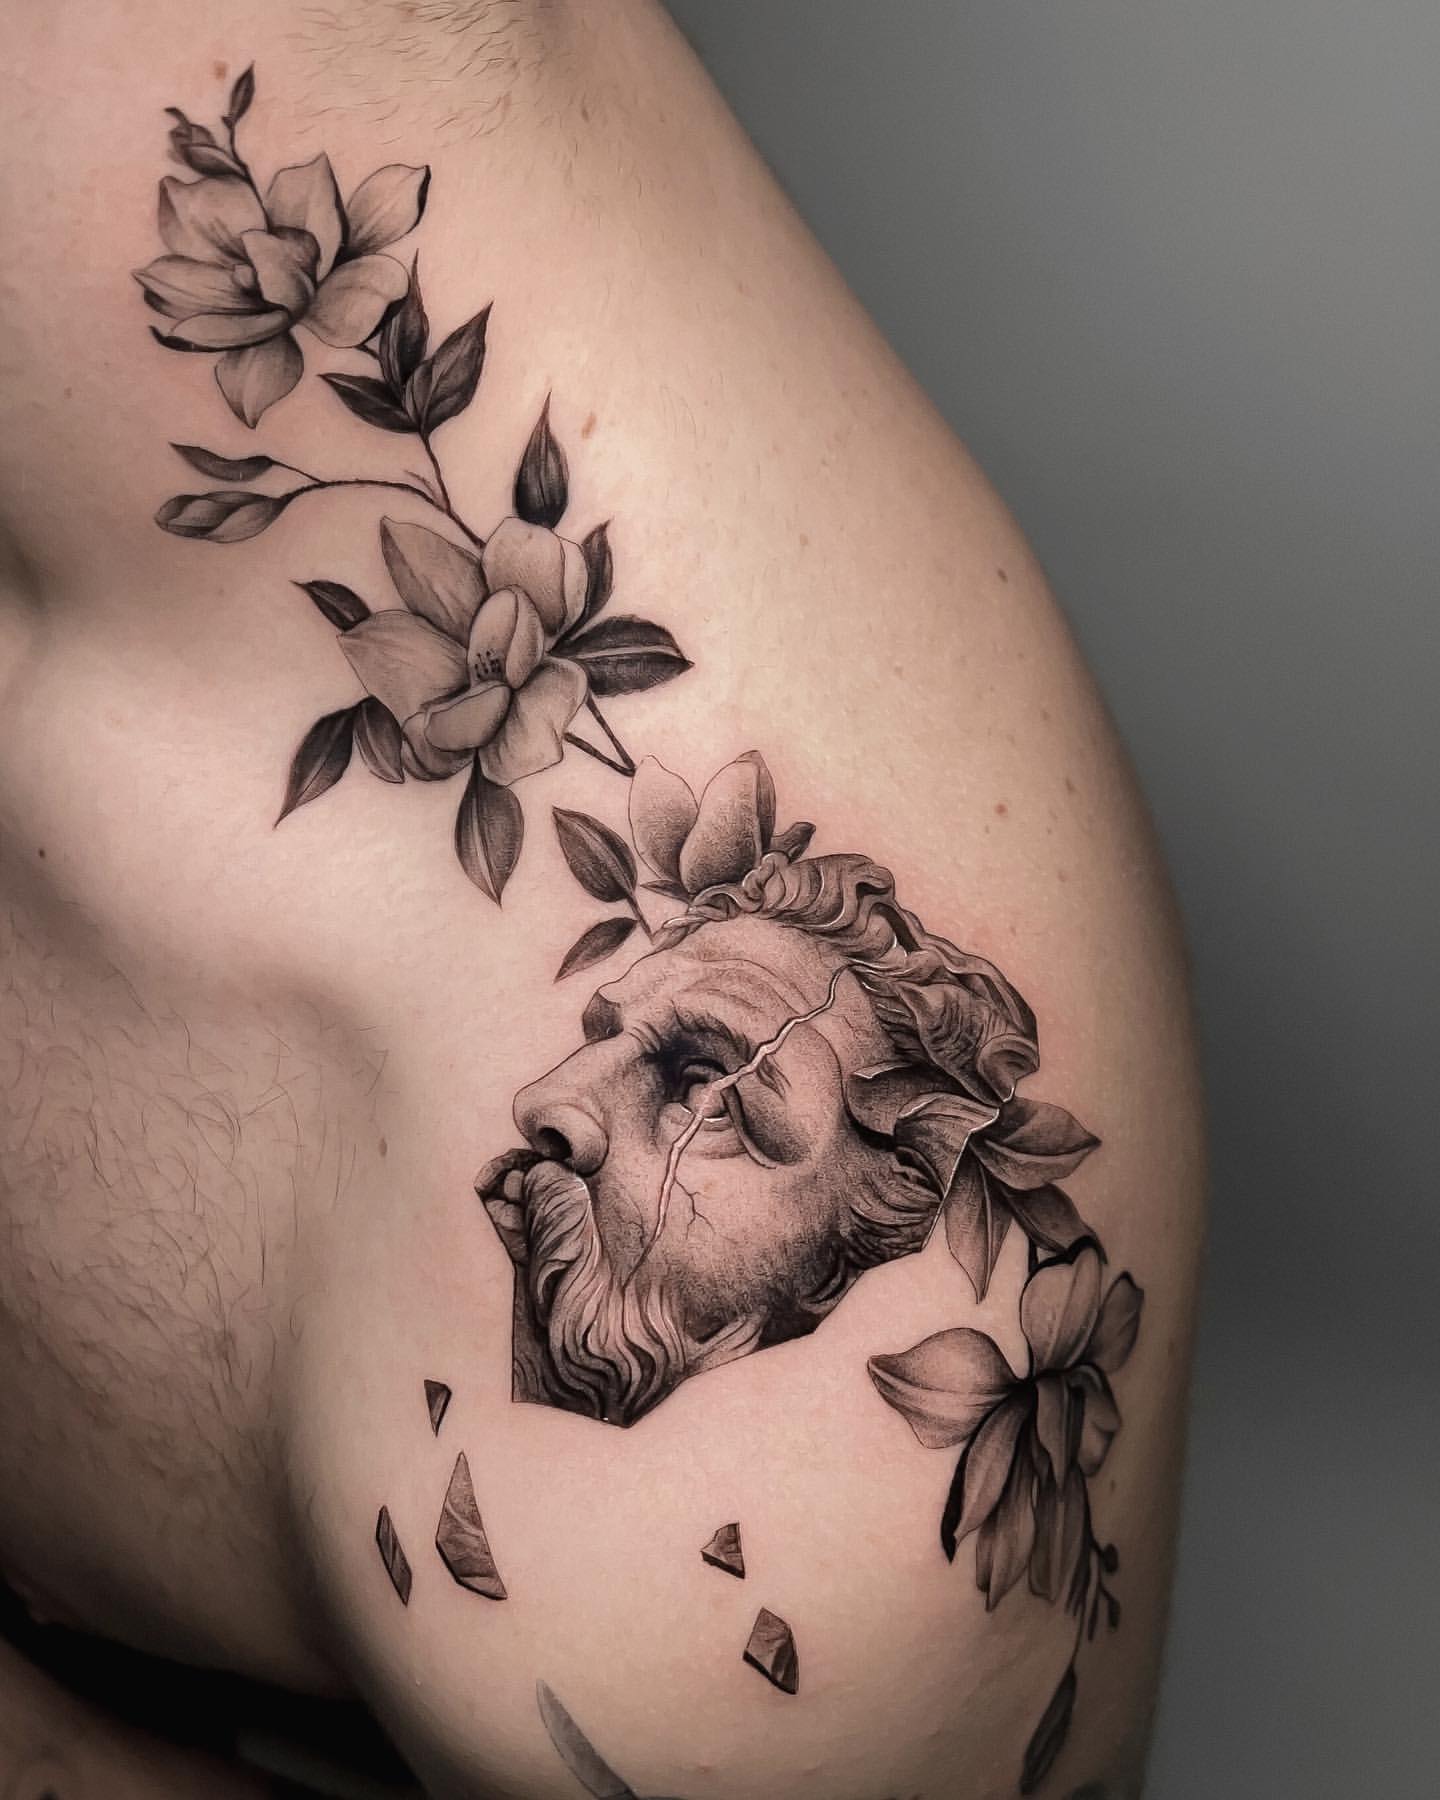 Arm Tattoos for Men: 27 Unique Designs and Their Meanings - VeAn Tattoo